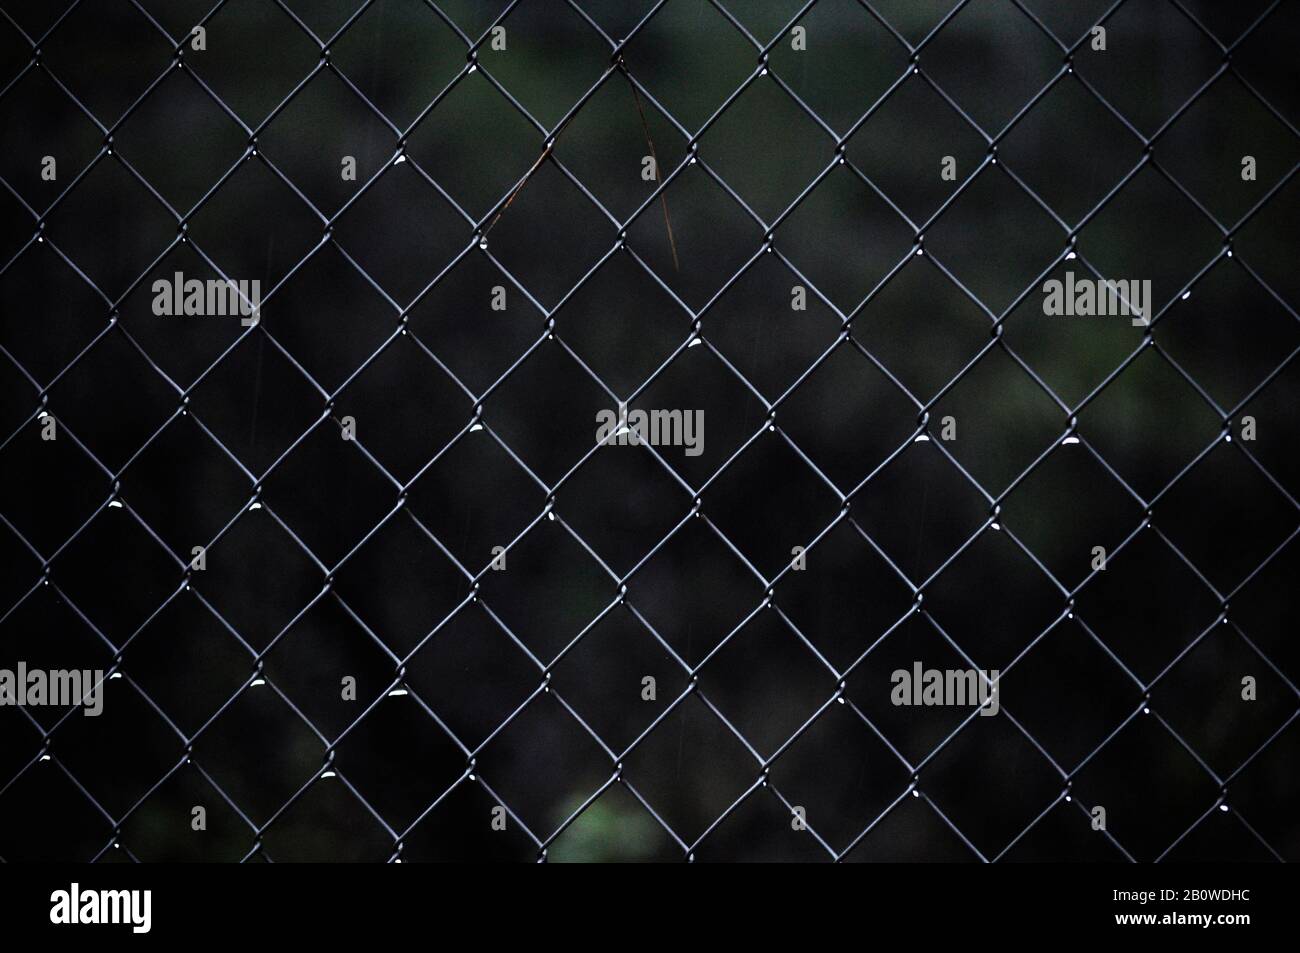 Full frame of wire mesh of dark cage design background bathed in raindrops/ Metal surface wet with droplets/ Abstract imagery for book covers Stock Photo